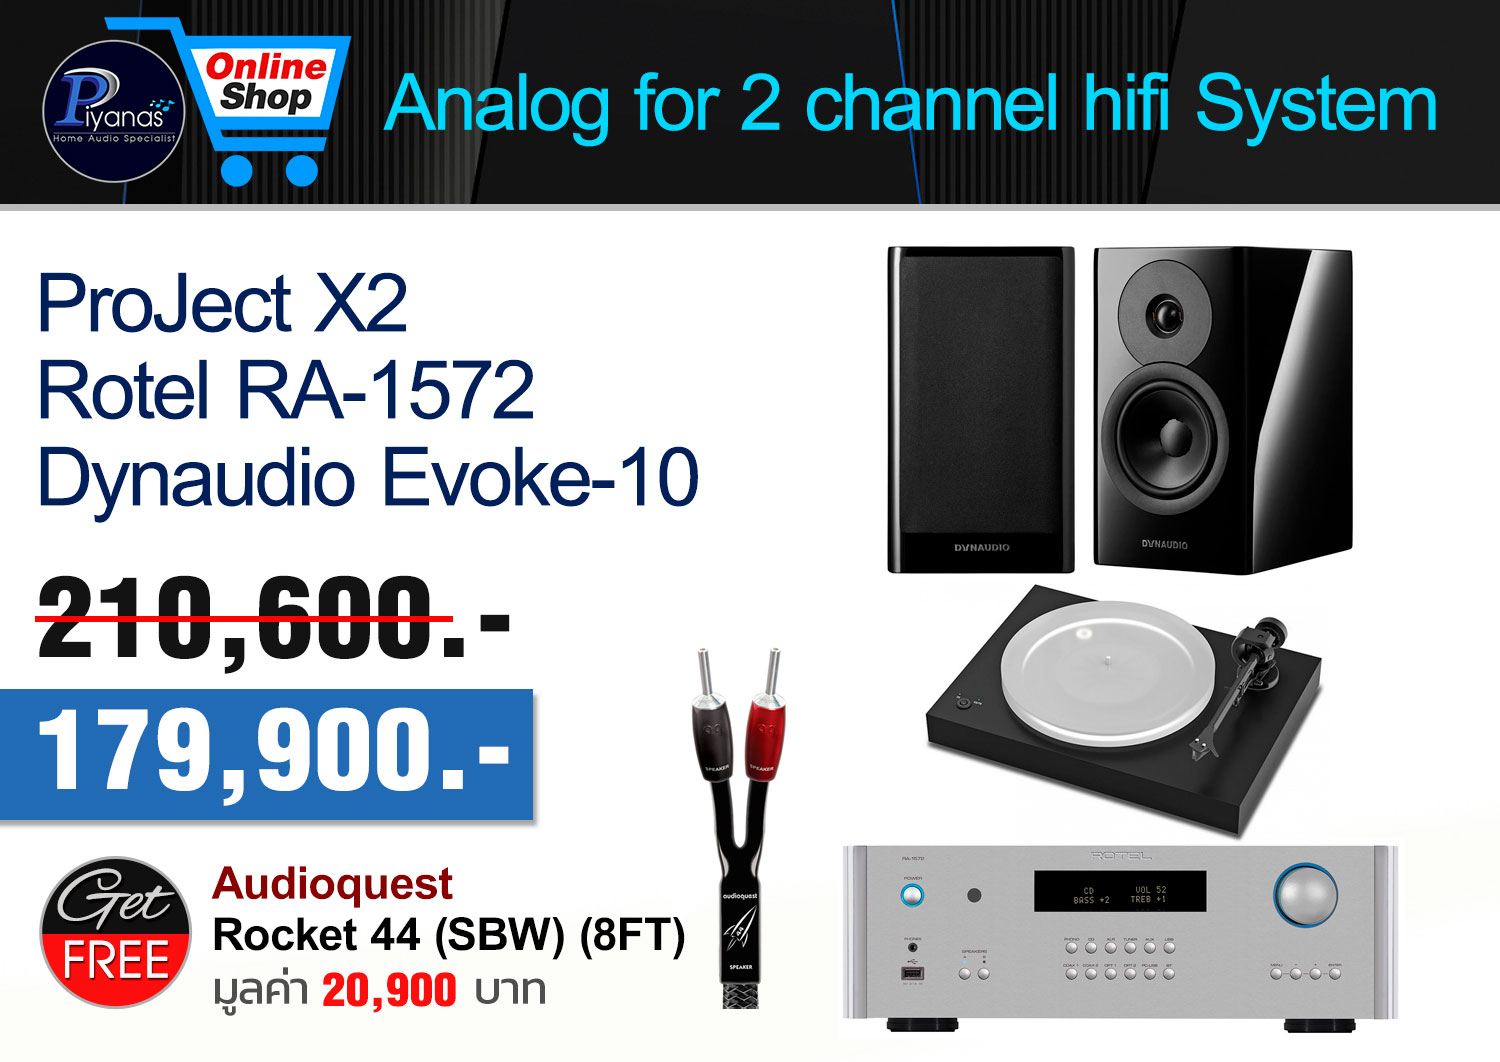 Analog for 2 channel hifi System 3